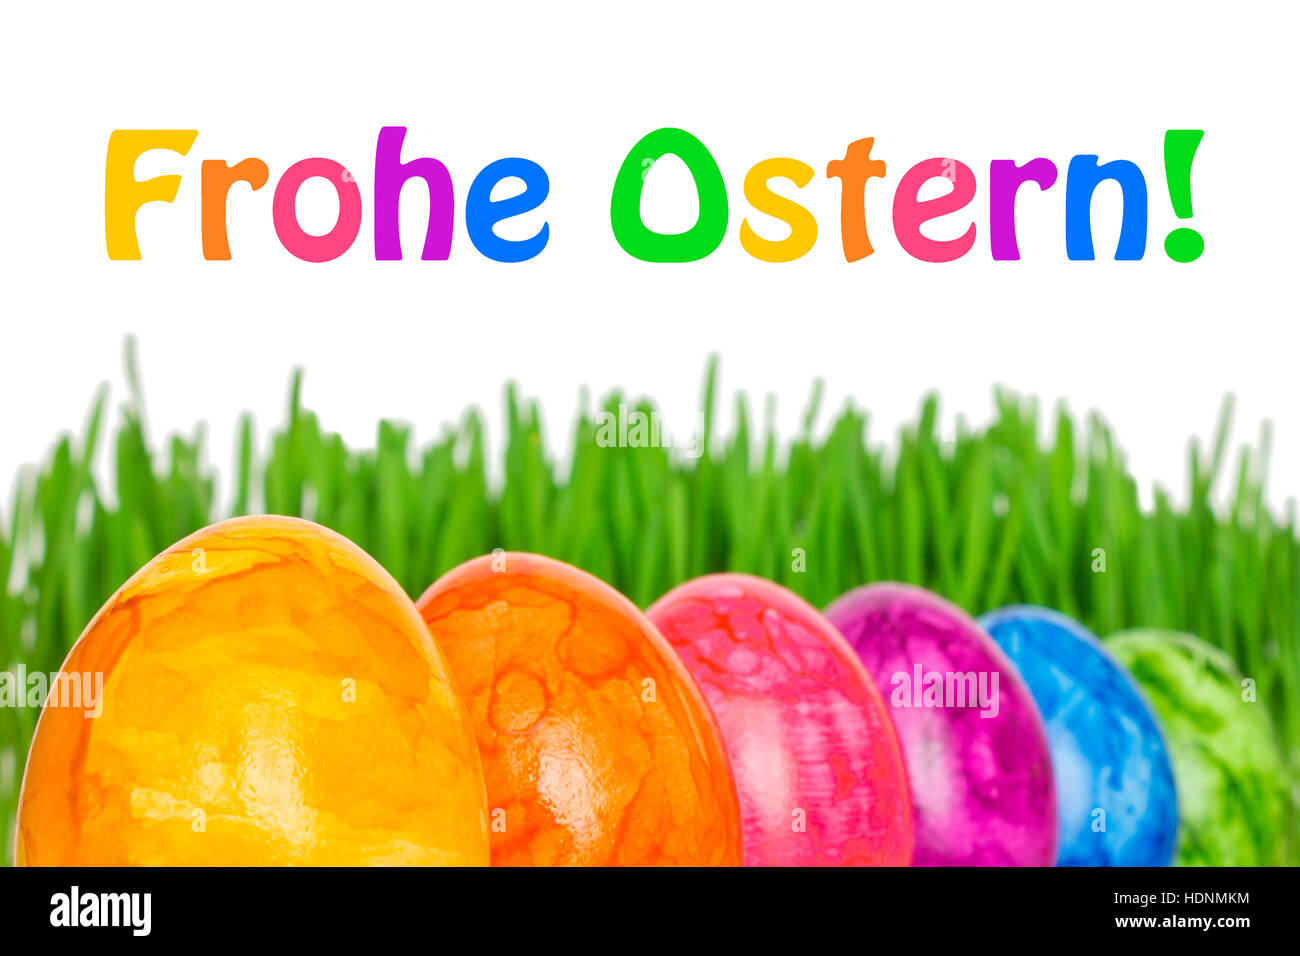 Template Happy Easter in german, Frohe Ostern, with 6 colorful Easter Eggs in front of green grass, bright rainbow colors Stock Photo